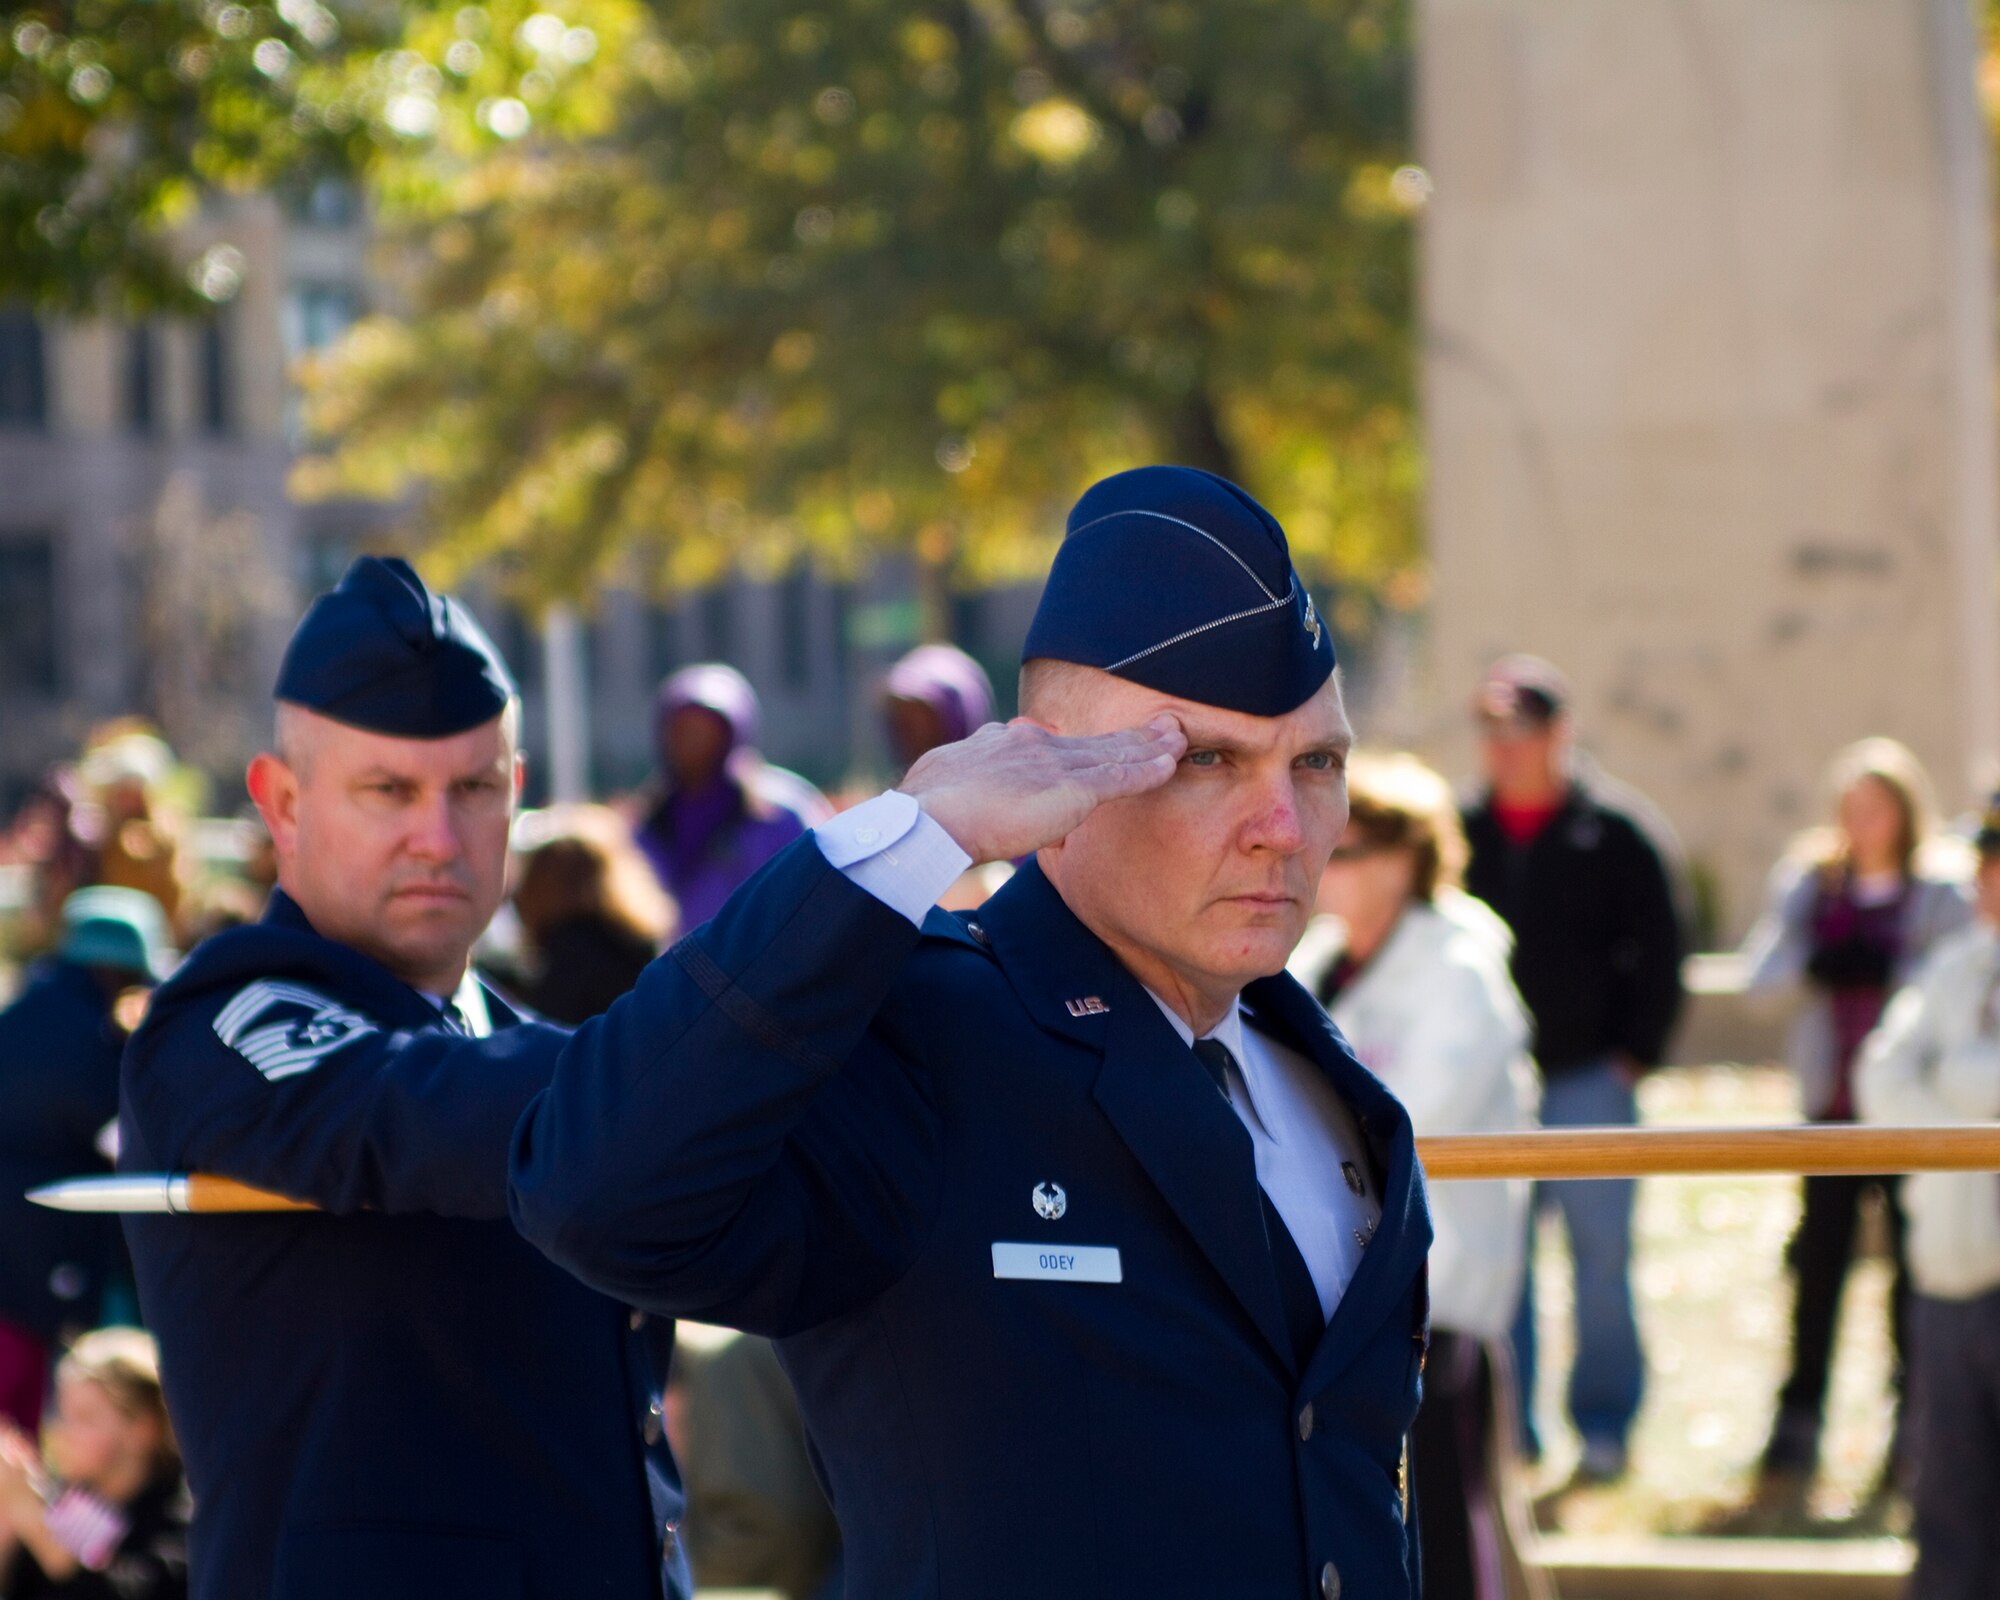 Col. John Odey, AFNIC commander, and Chief Master Sgt. Paul Taitt, superintendent, salute local dignitaries during a Veterans Day parade in downtown St. Louis Nov. 6. (U.S. Air Force photo/MSgt G. Shawn Lowry)
